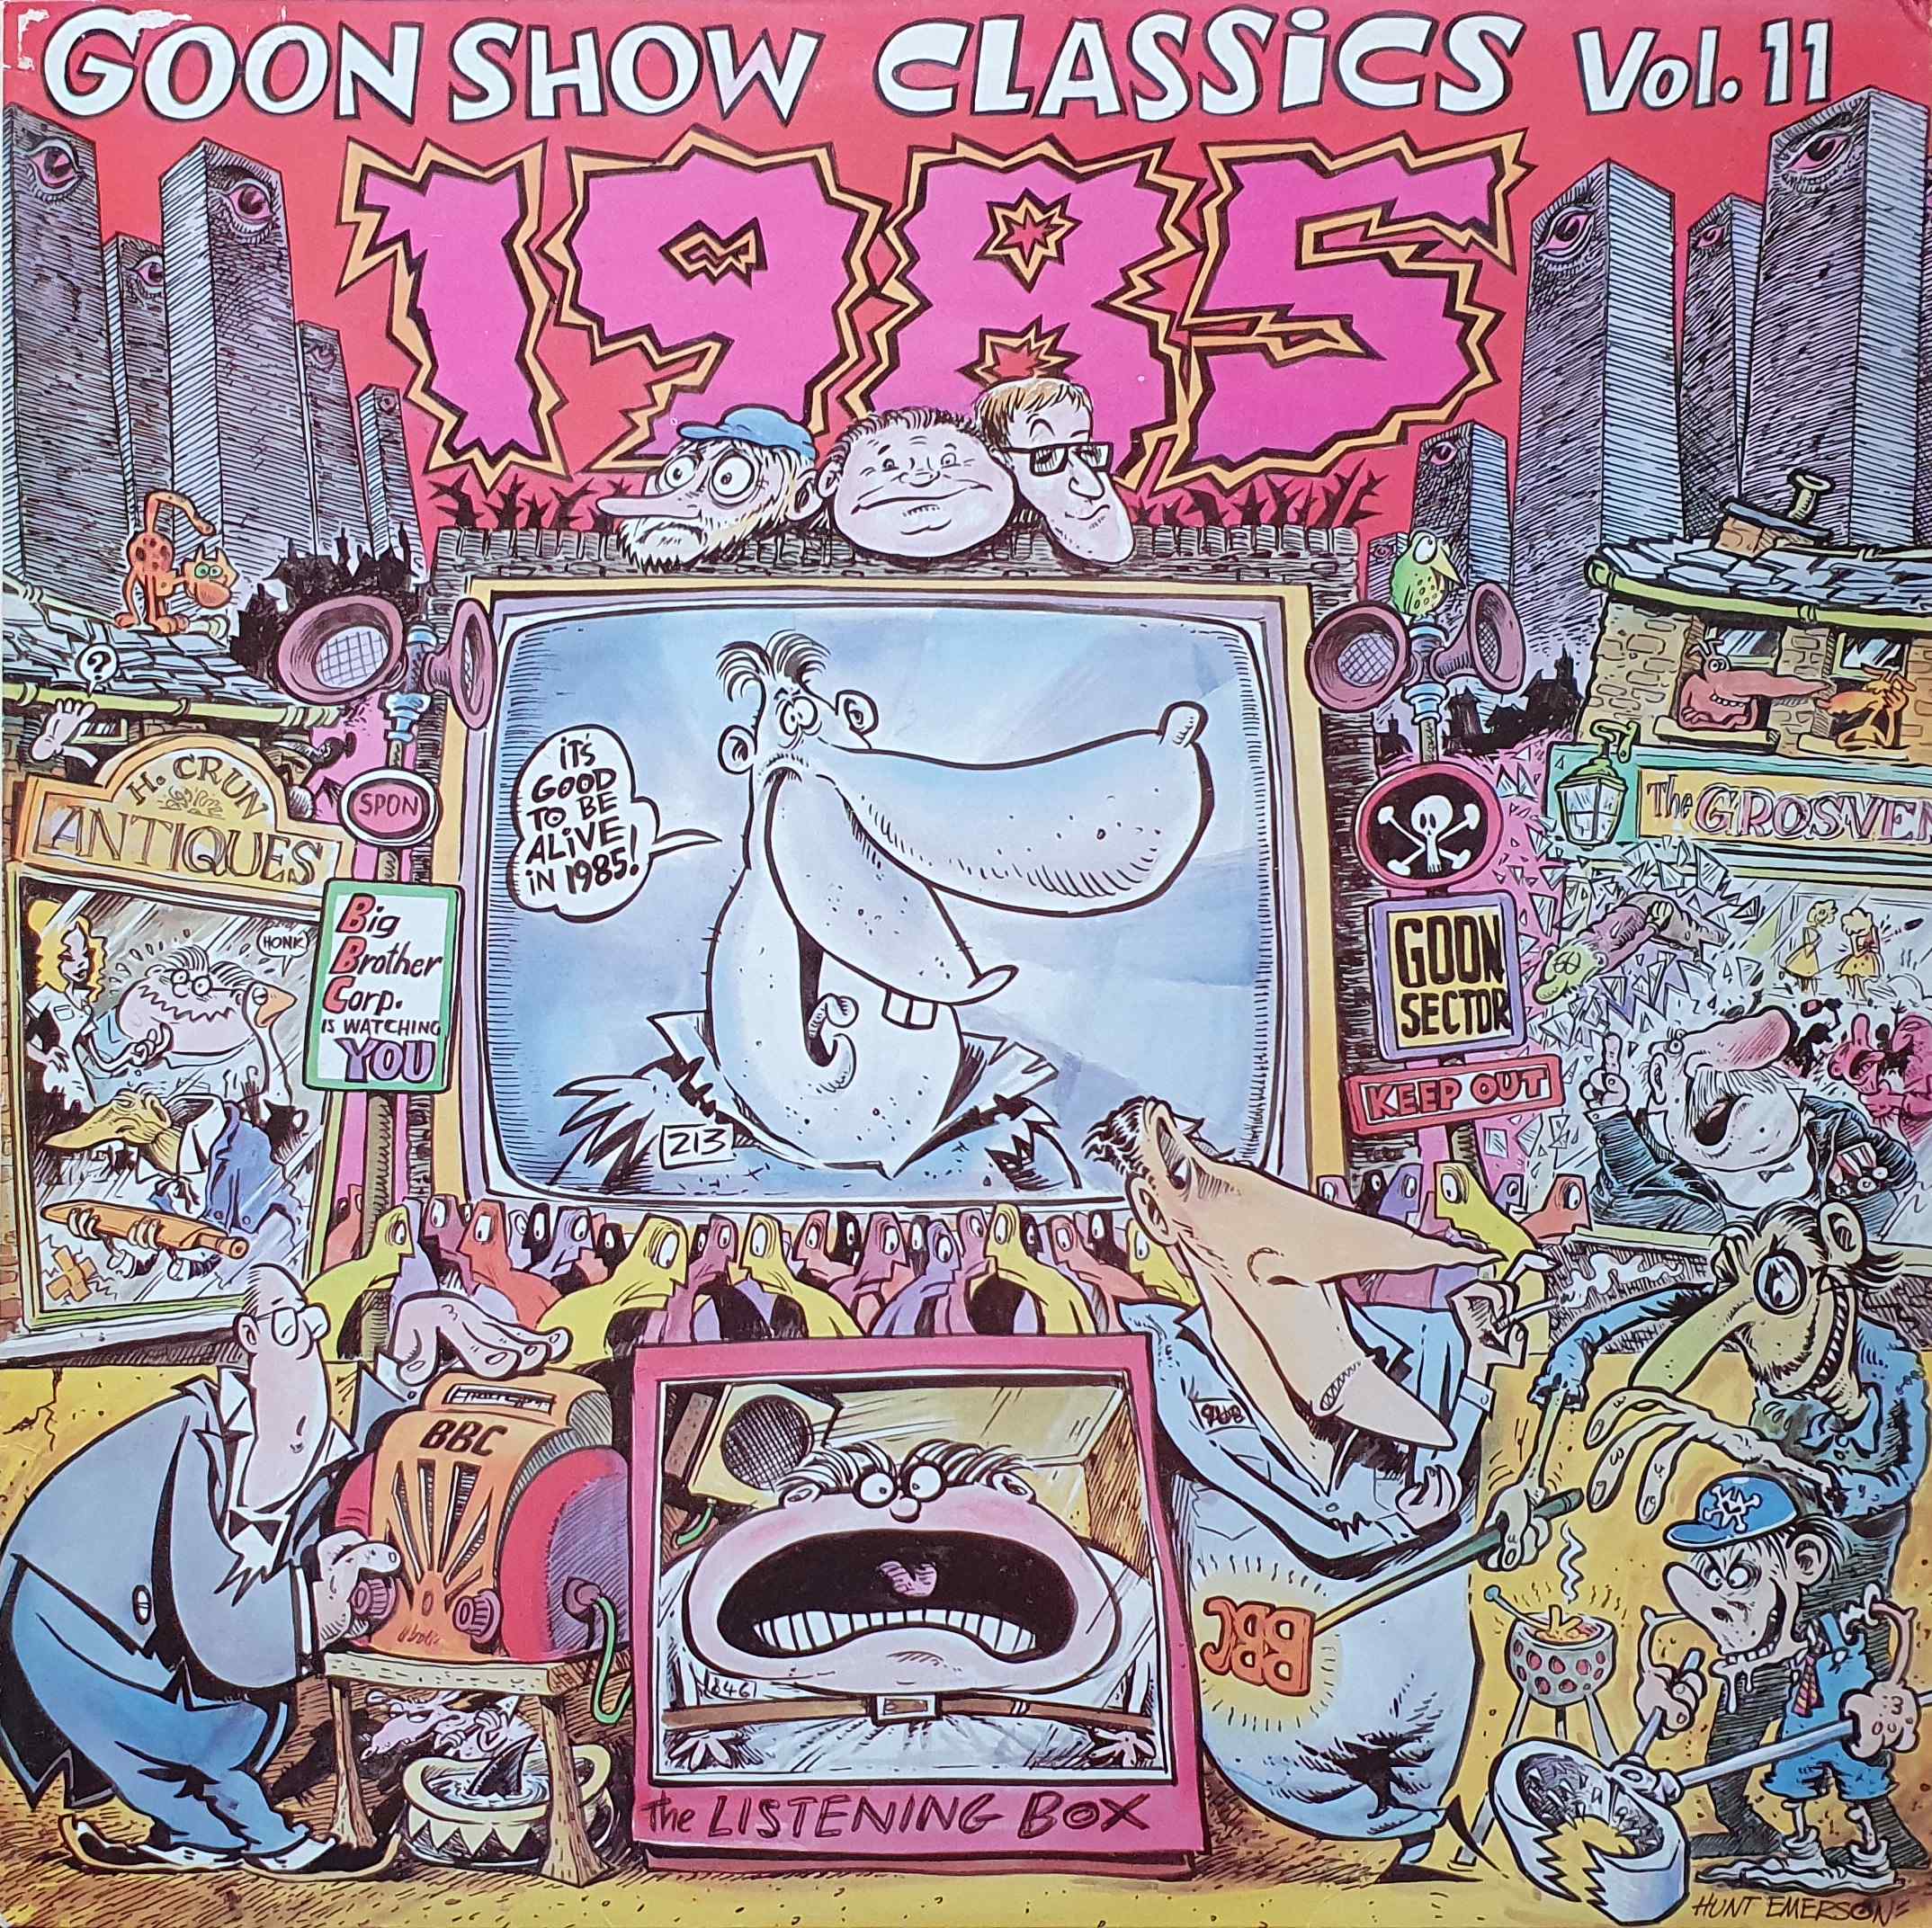 Picture of REB 565 Goon show classics - Volume 11 by artist Spike Milligan / Eric Sykes / Larry Stephens from the BBC albums - Records and Tapes library